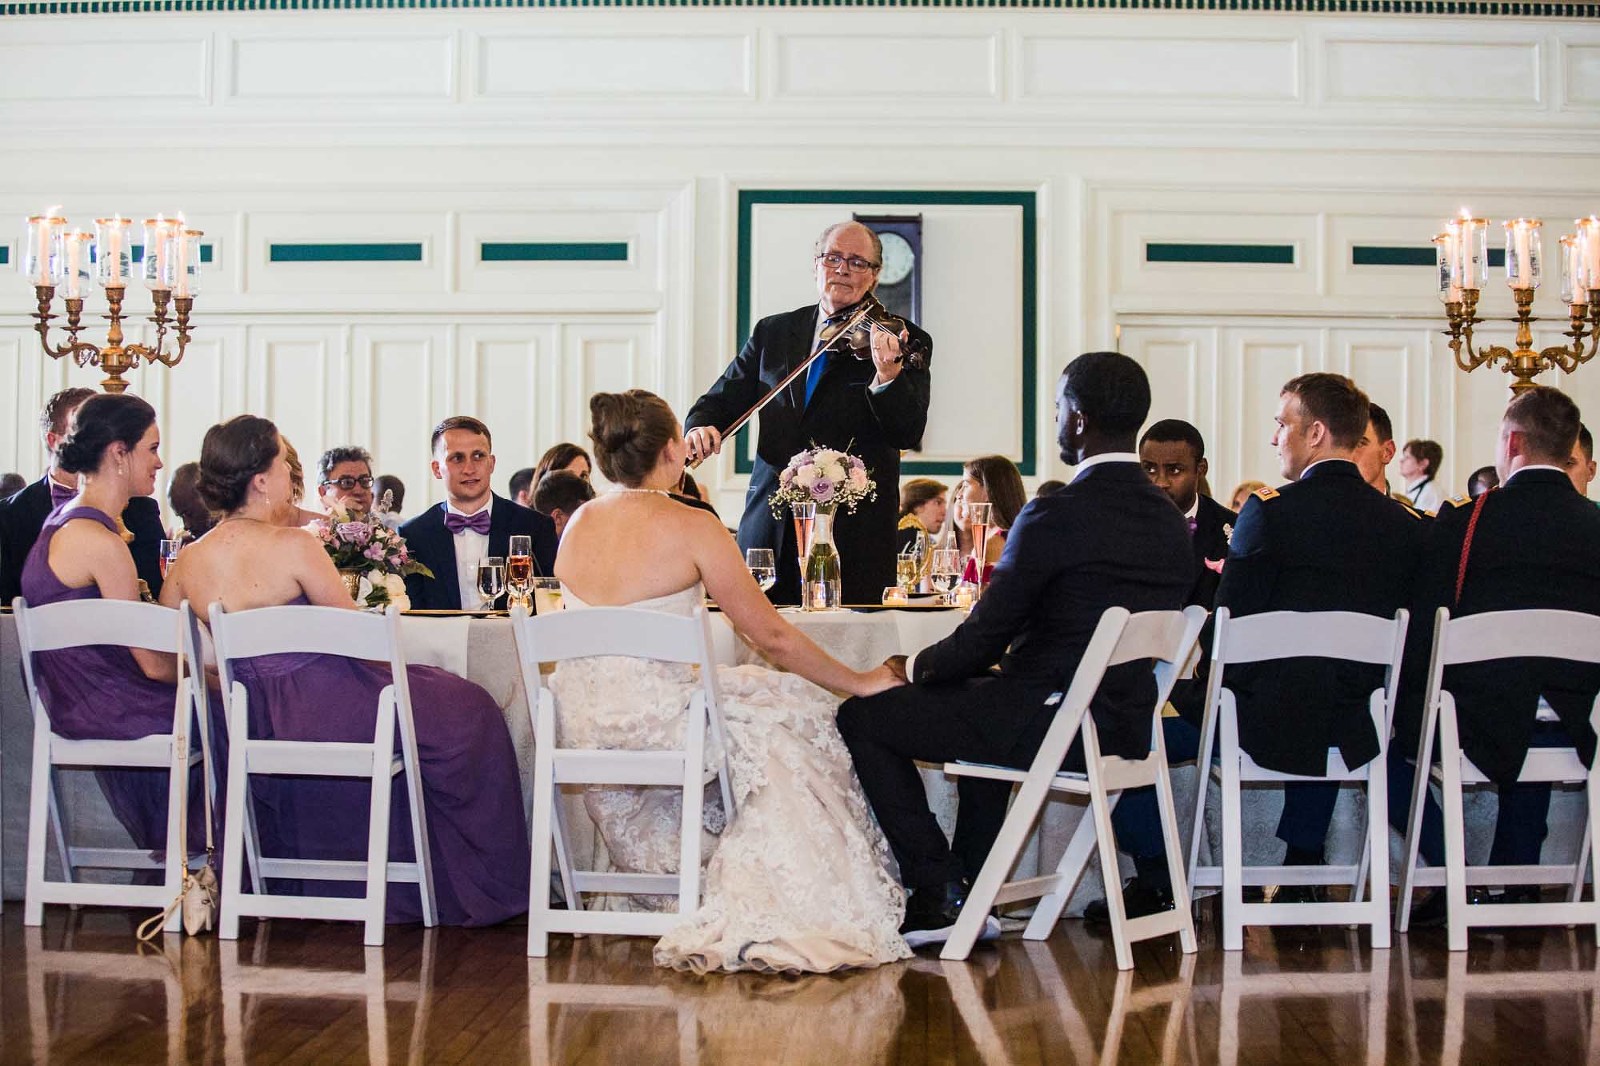 violinist serenades a bride and groom while their wedding party, bridesmaids, groomsmen, family, and friends look on at their wedding reception at the unique pittsburgh venue soldiers and sailors